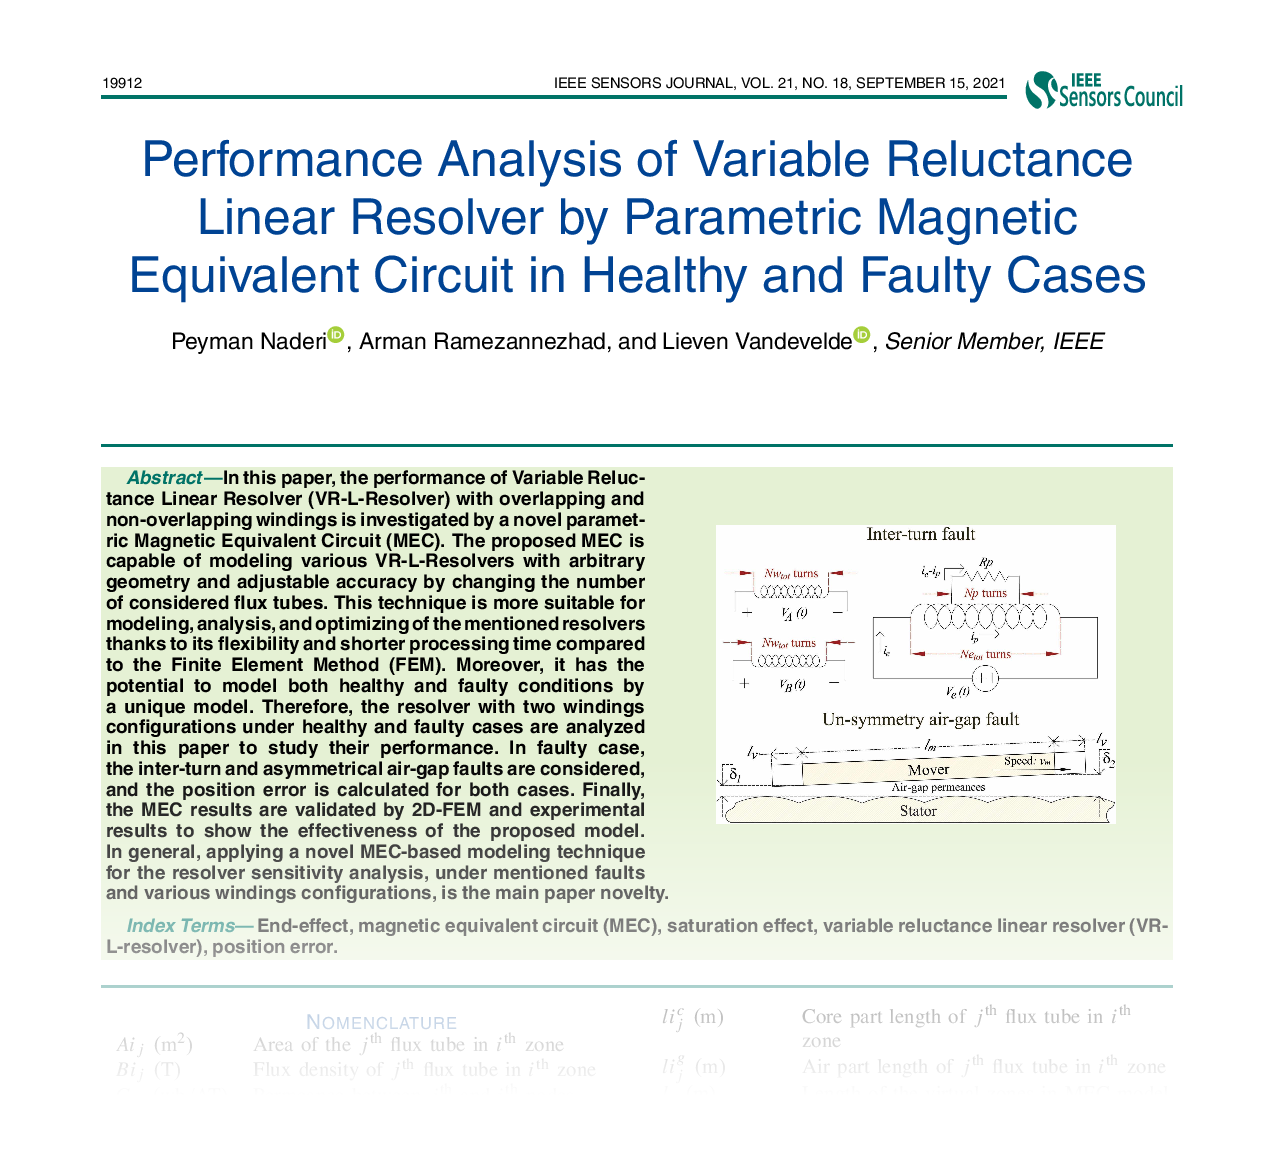 Performance Analysis of Variable Reluctance Linear Resolver by Parametric Magnetic Equivalent Circuit in Healthy and Faulty Cases